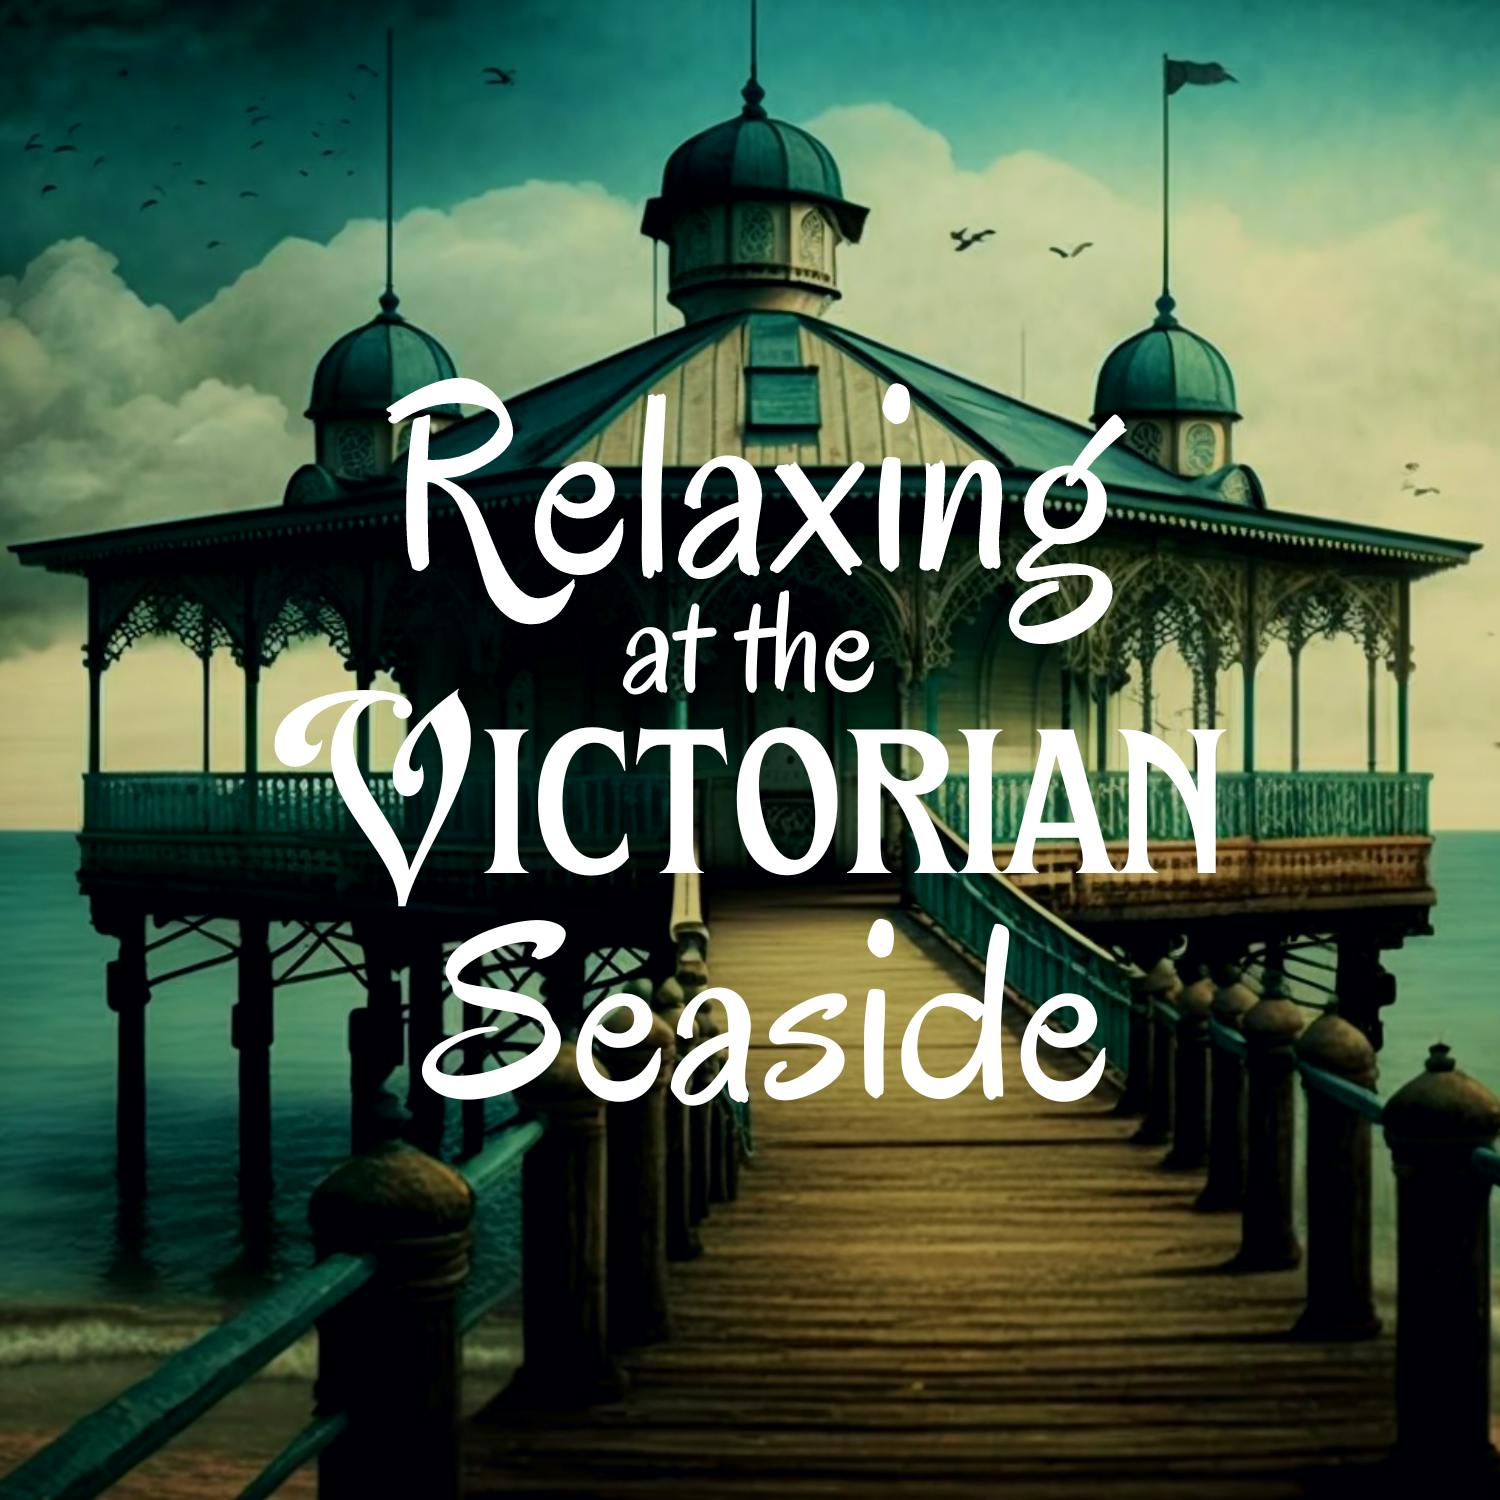 Relaxing at the Victorian Seaside